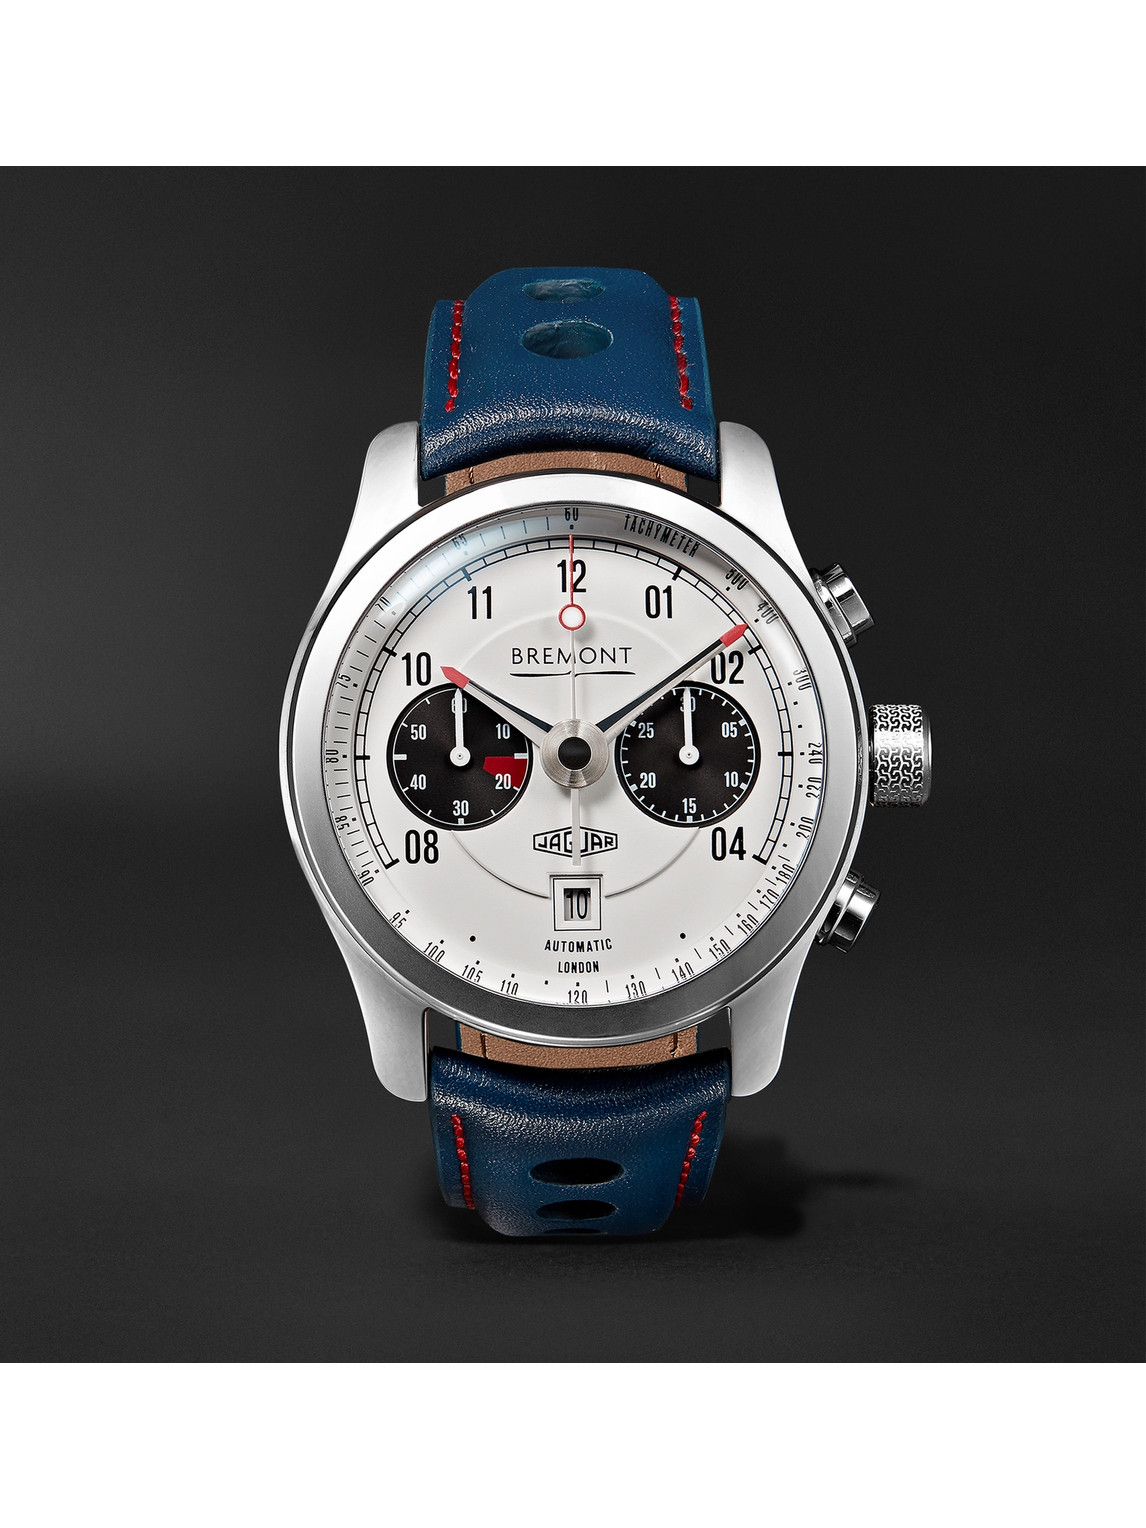 Jaguar MKII Automatic Chronograph 43mm Stainless Steel and Leather Watch, Ref. No. J-MKII-WH-R-S